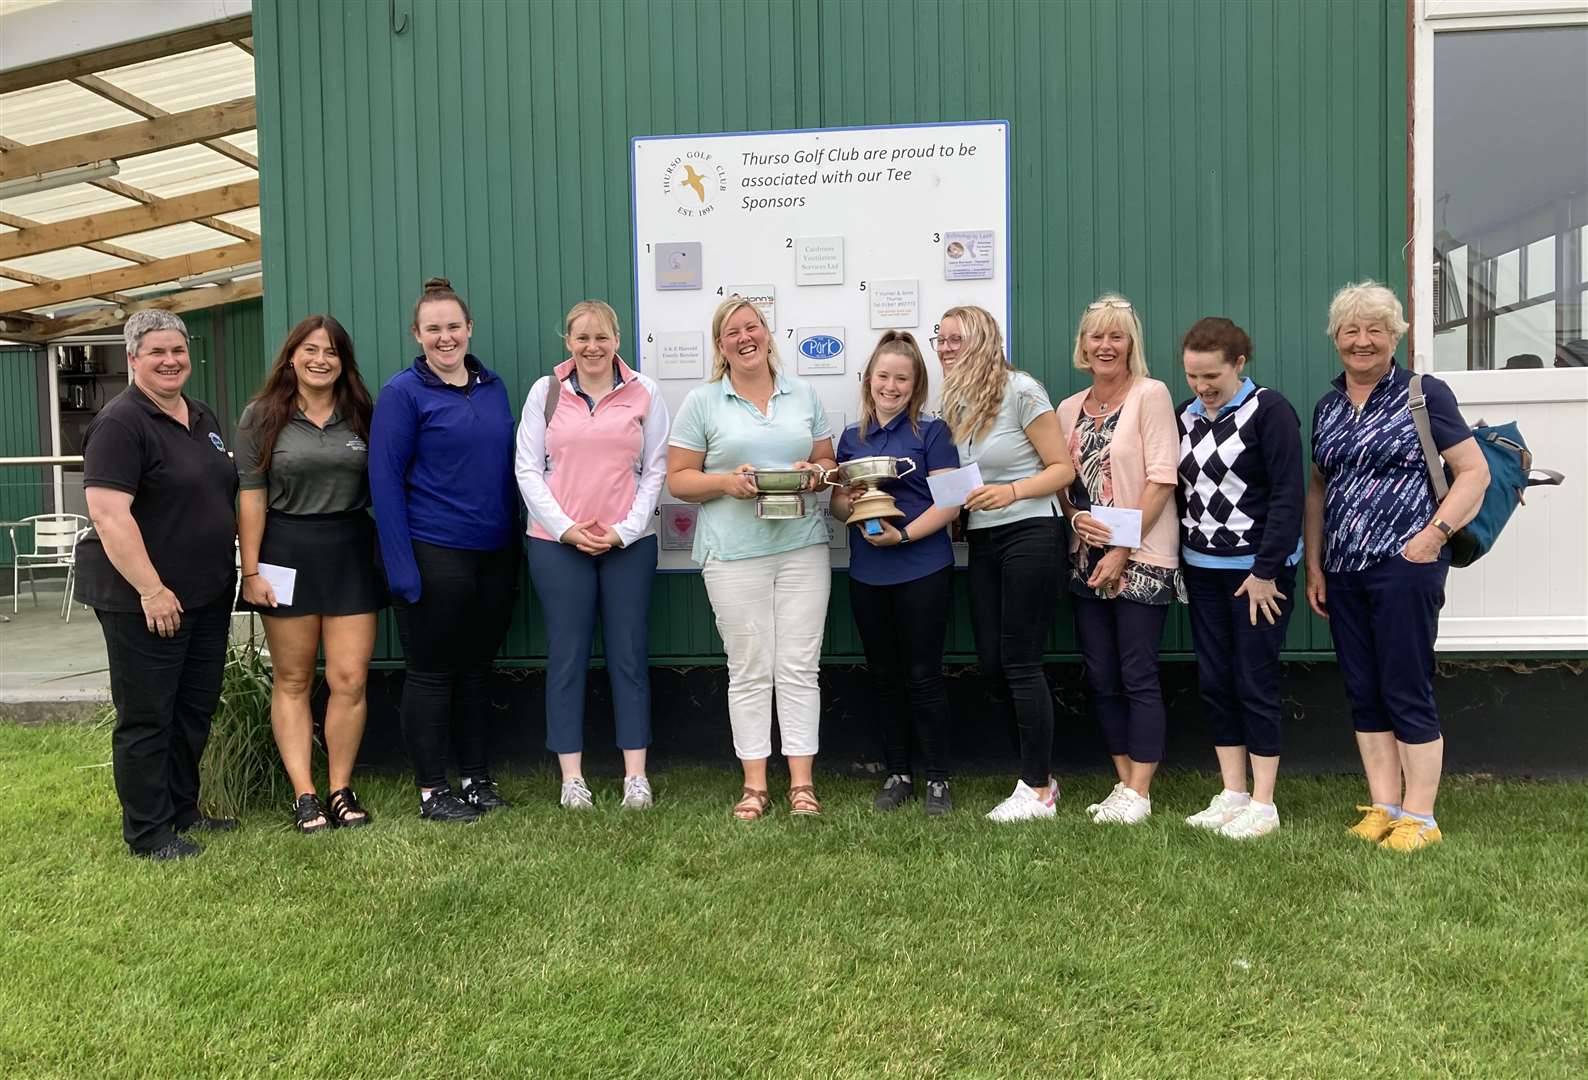 All smiles for the prize-winners in the recent Ladies' Open at Thurso Golf Club.